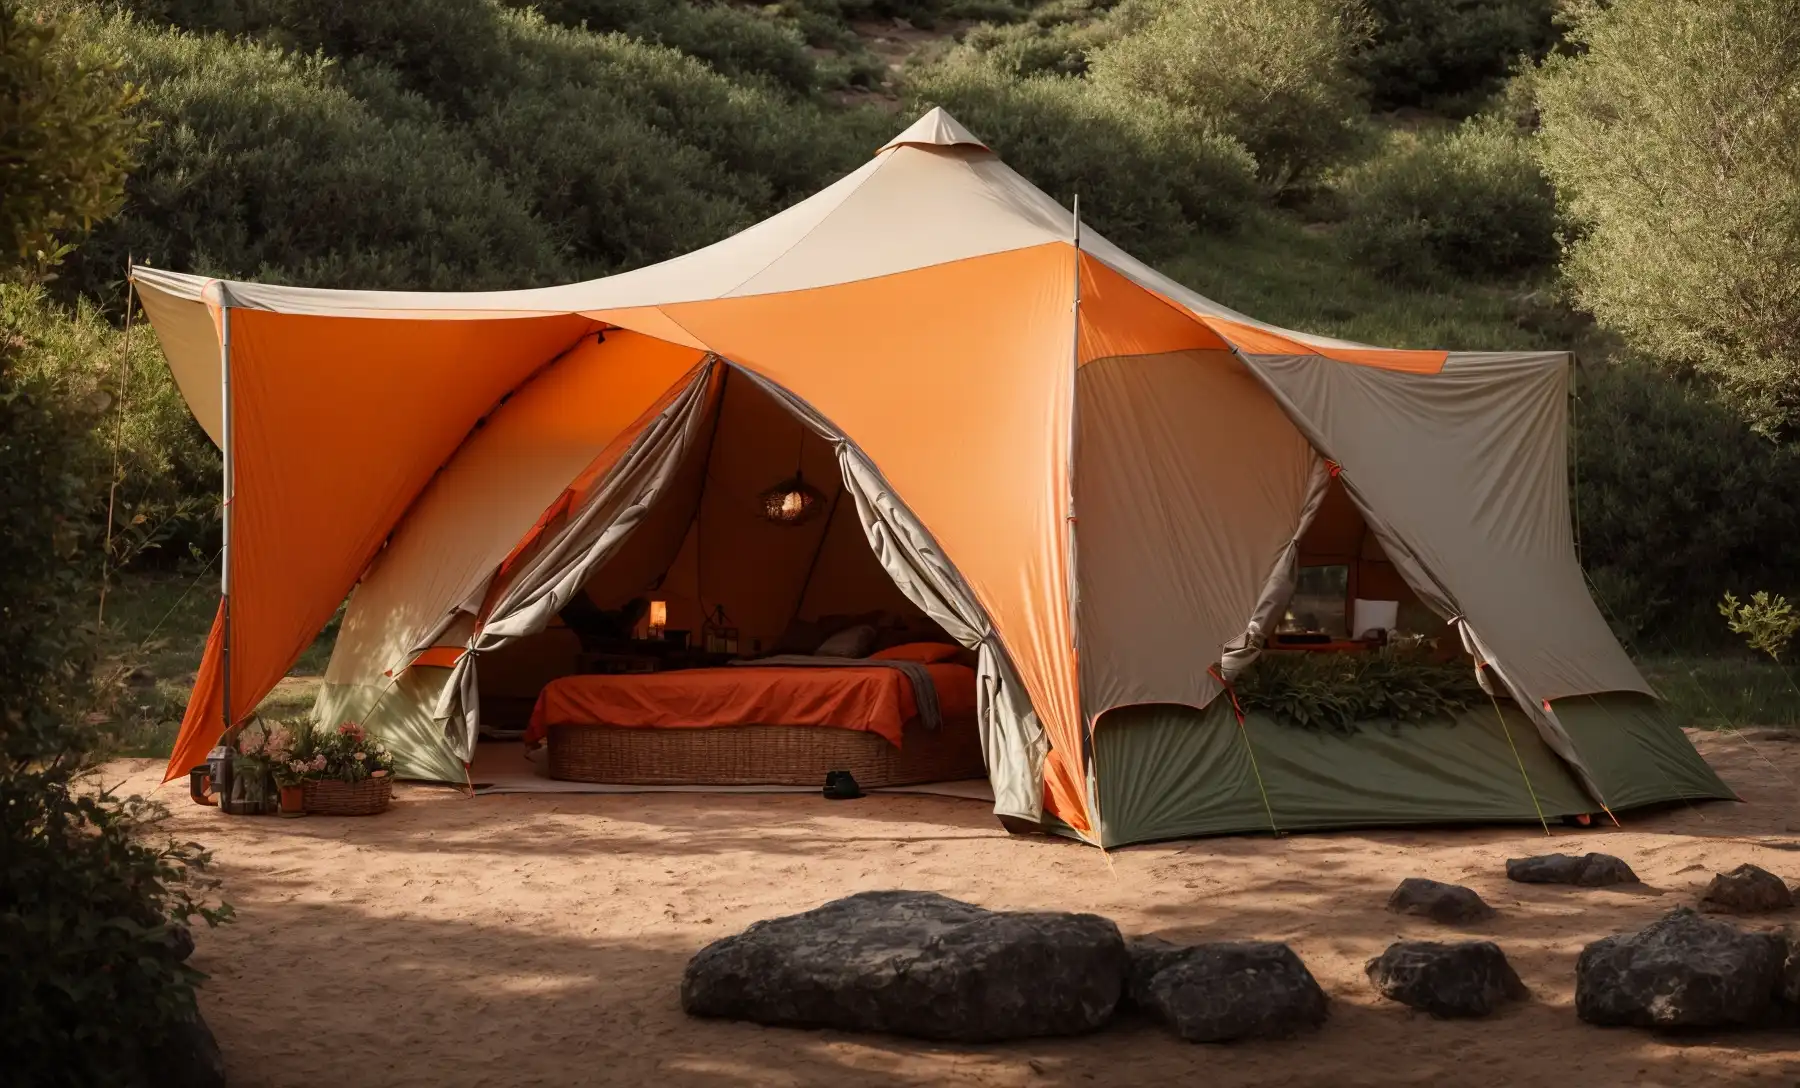 A spacious 20x20 tent in a outdoor landscape